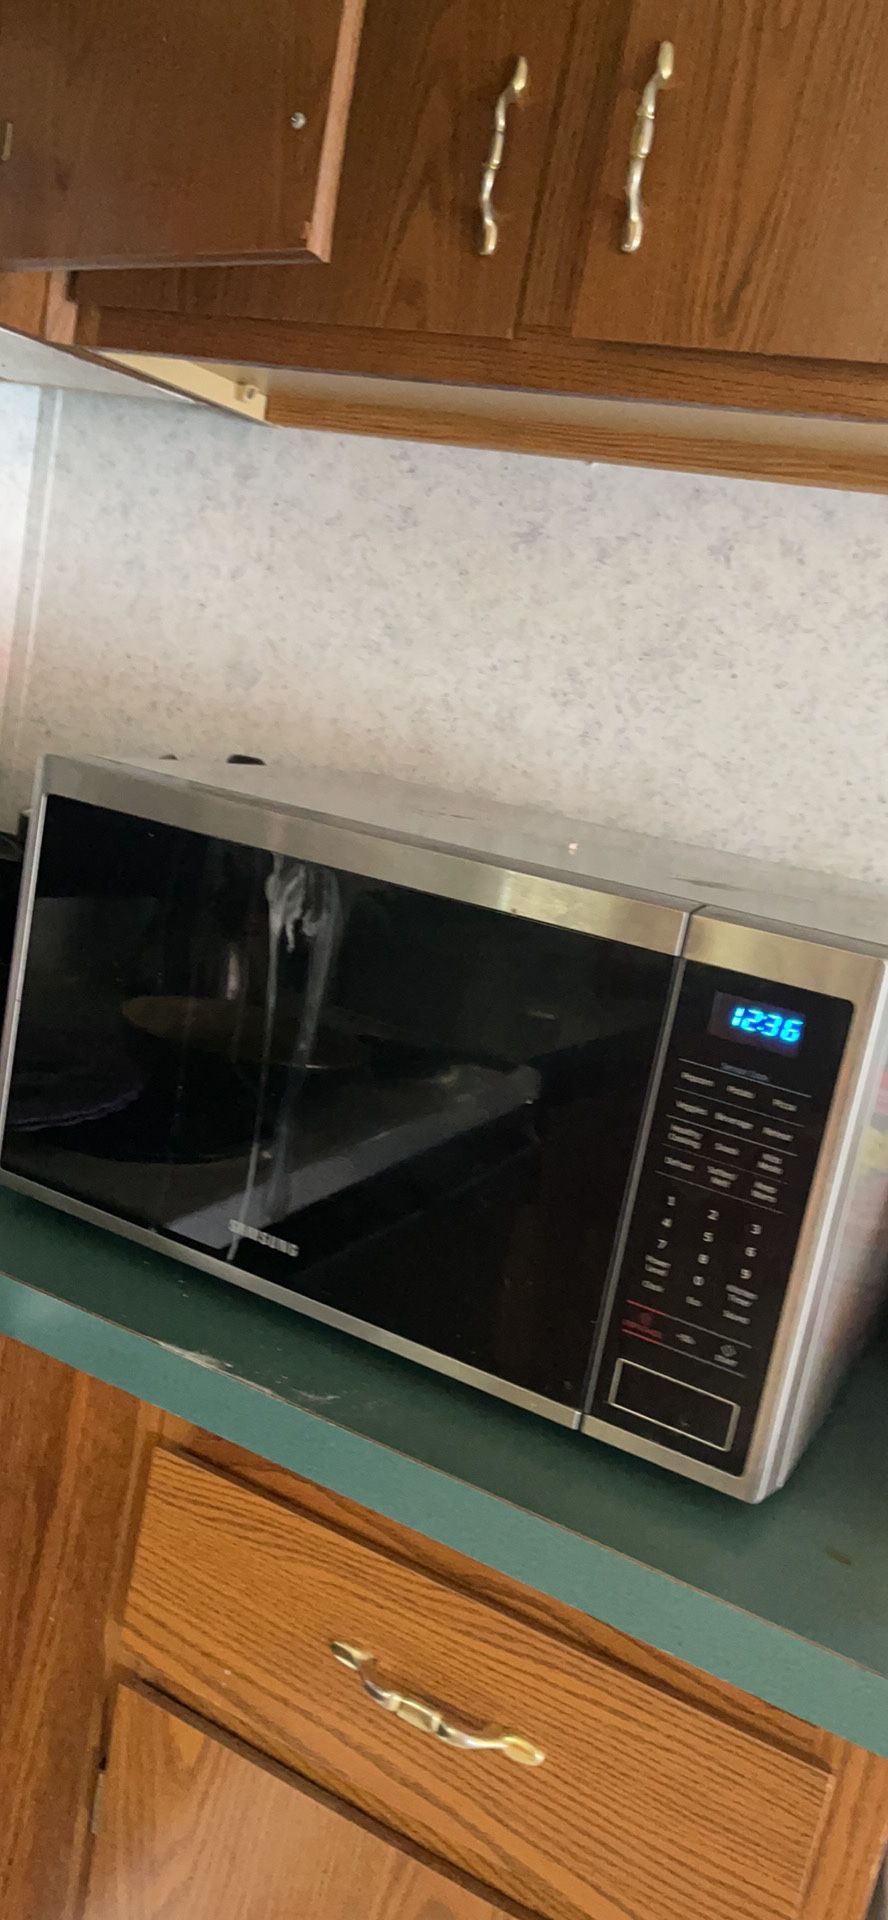 samsung 120 v microwave 1.6 cu ft Over the range microwave! Excellent working condition barely used!